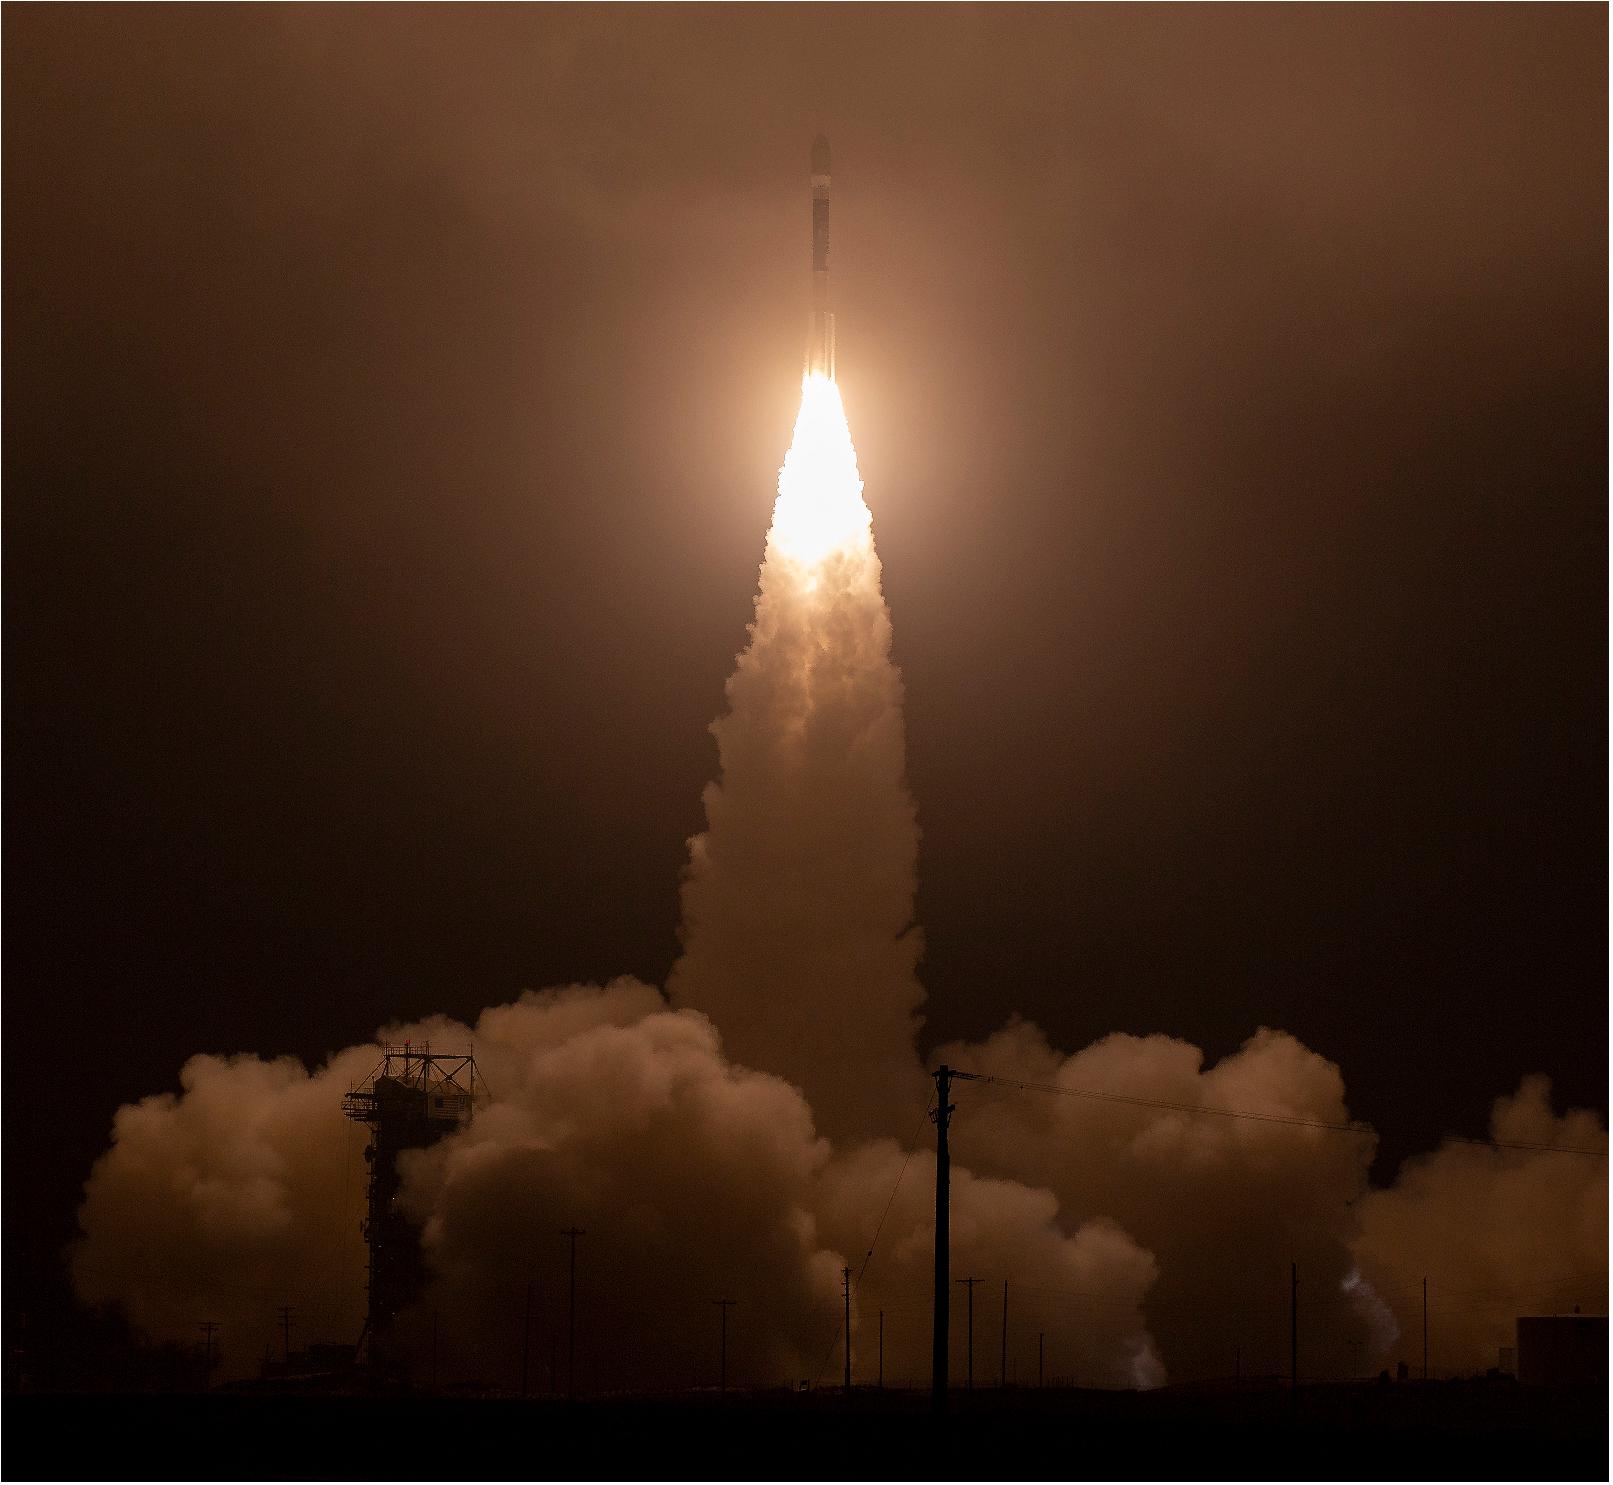 Figure 8: The ULA Delta-II rocket with NASA's ICESat-2 onboard is seen shortly after the mobile service tower at SLC-2 was rolled back on 15 September 2018, at Vandenberg Air Force Base in California (image credit: NASA)